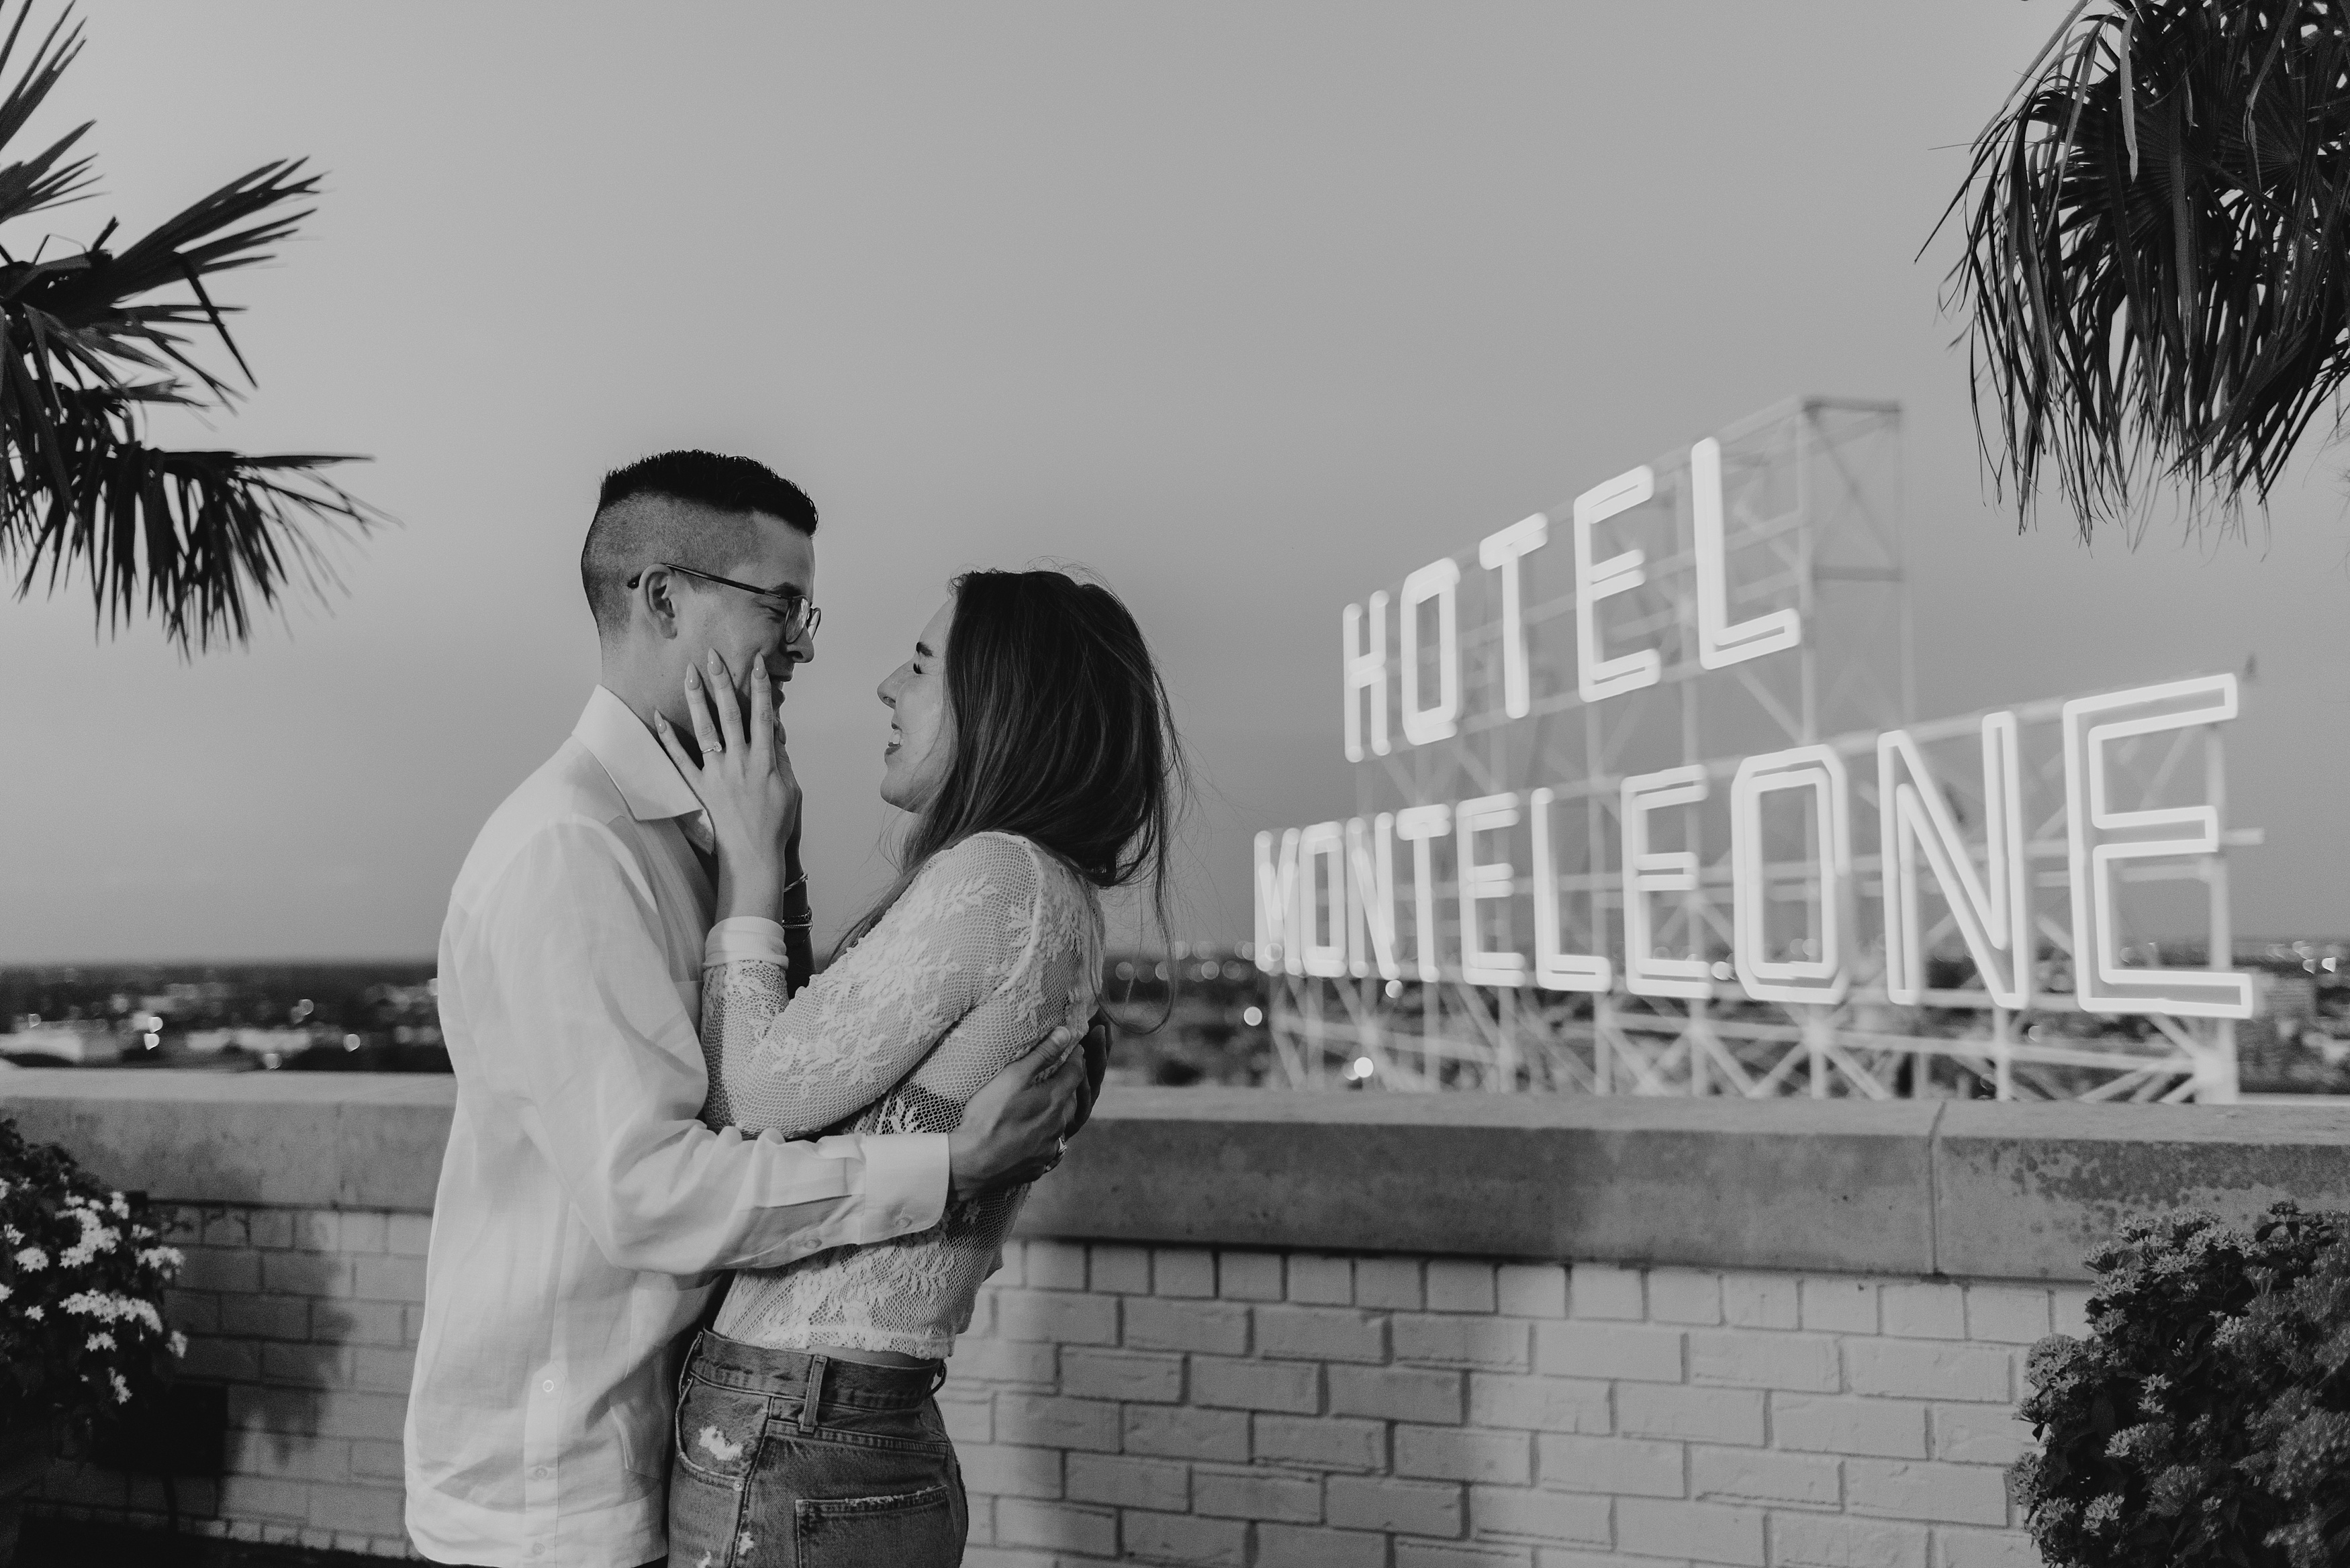 black and white photo of couple embracing each other in front of hotel monteleone